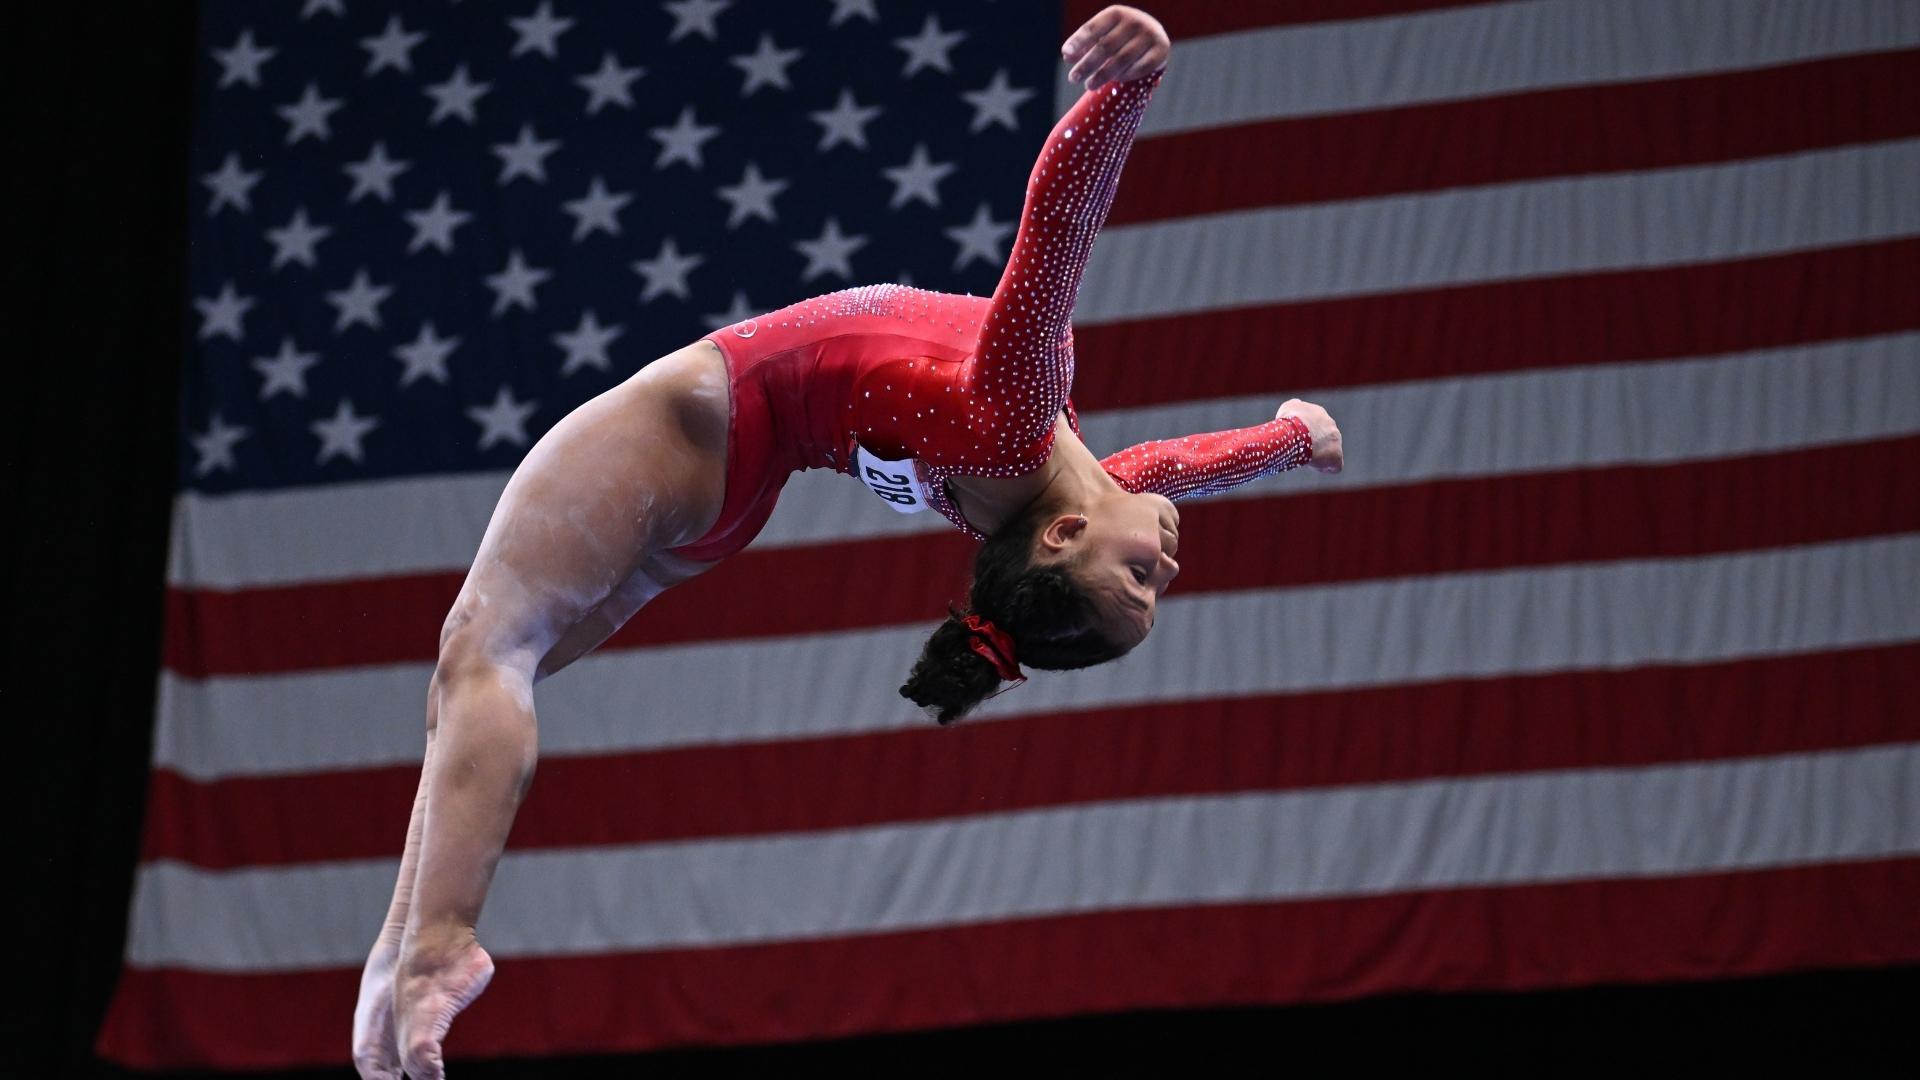 2022 OOFOS U.S. Gymnastics Championships: Konnor McClain edges Shilese Jones for national title in thriller